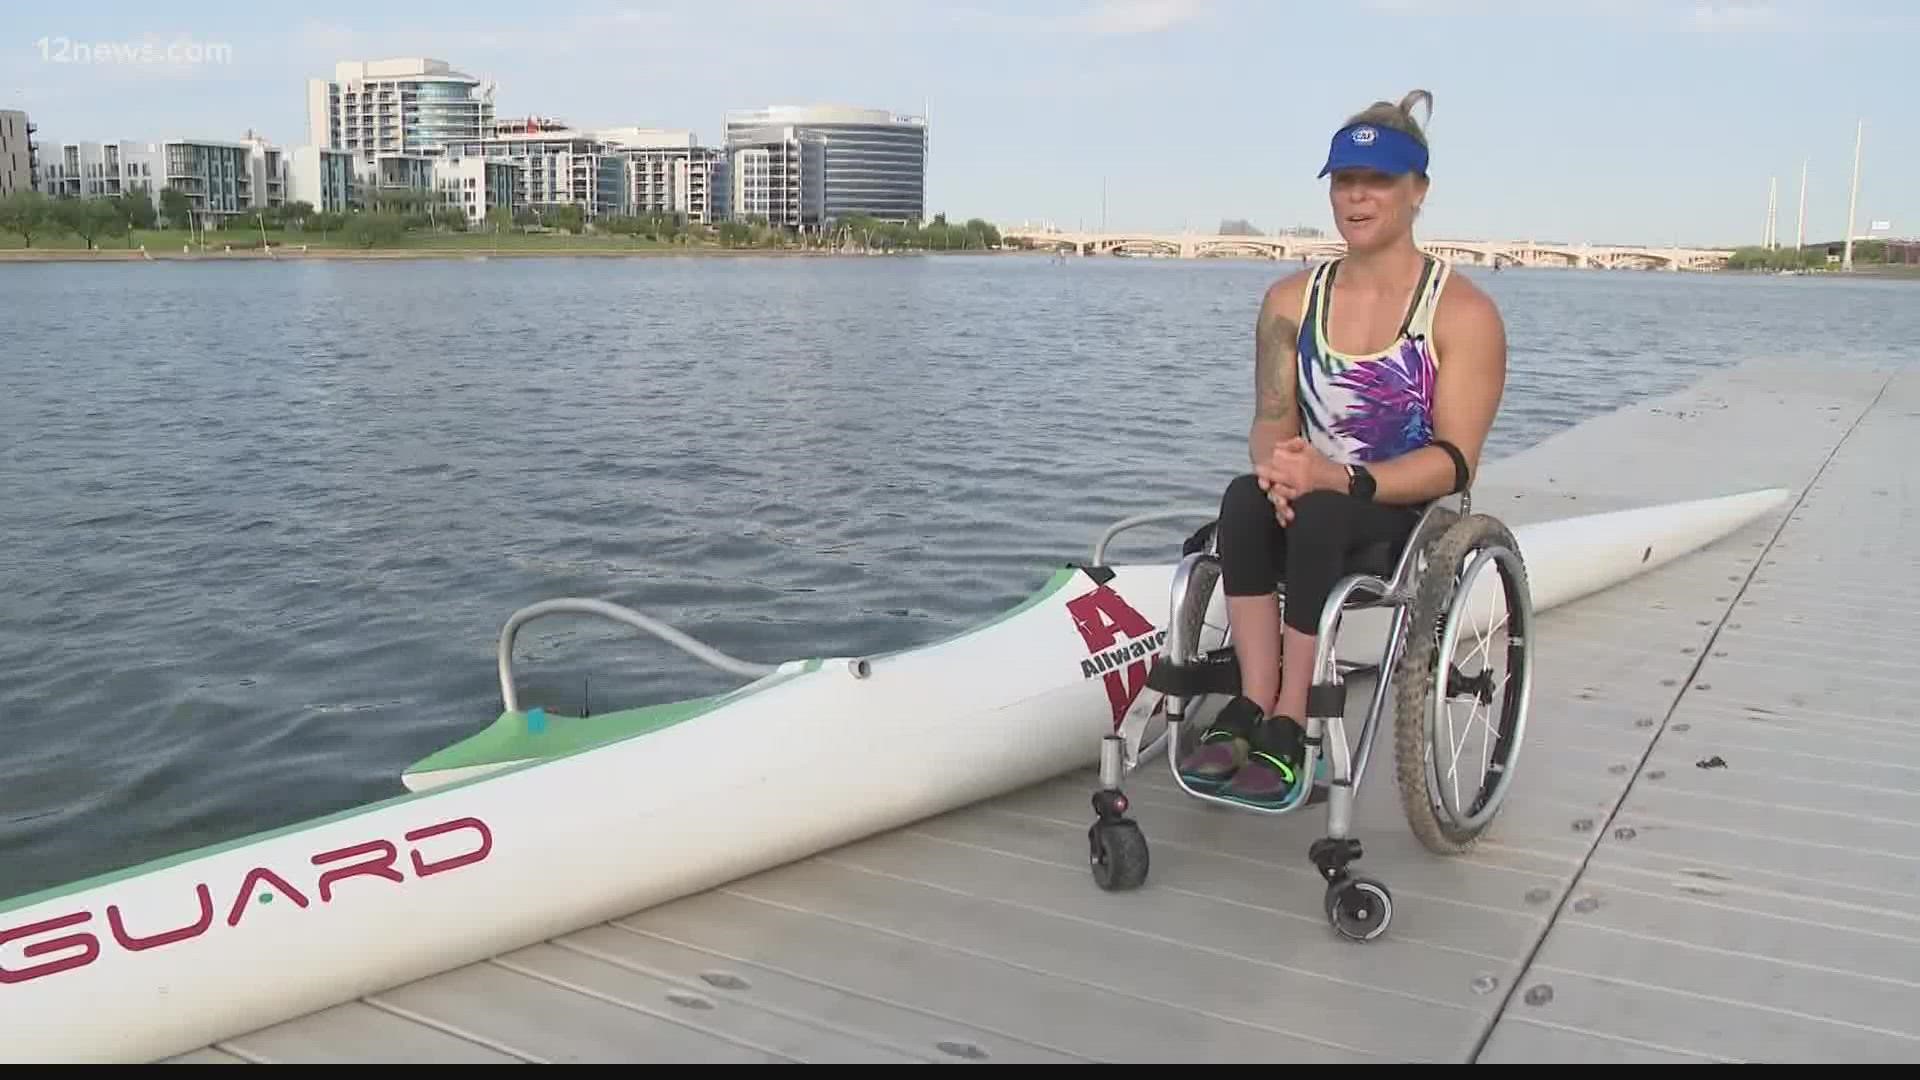 Paralympic athlete Kaitlyn Verfuerth has her sights set on Tokyo waters, being a part of Team USA and the Paralympic podium. Jen Wahl has the story.